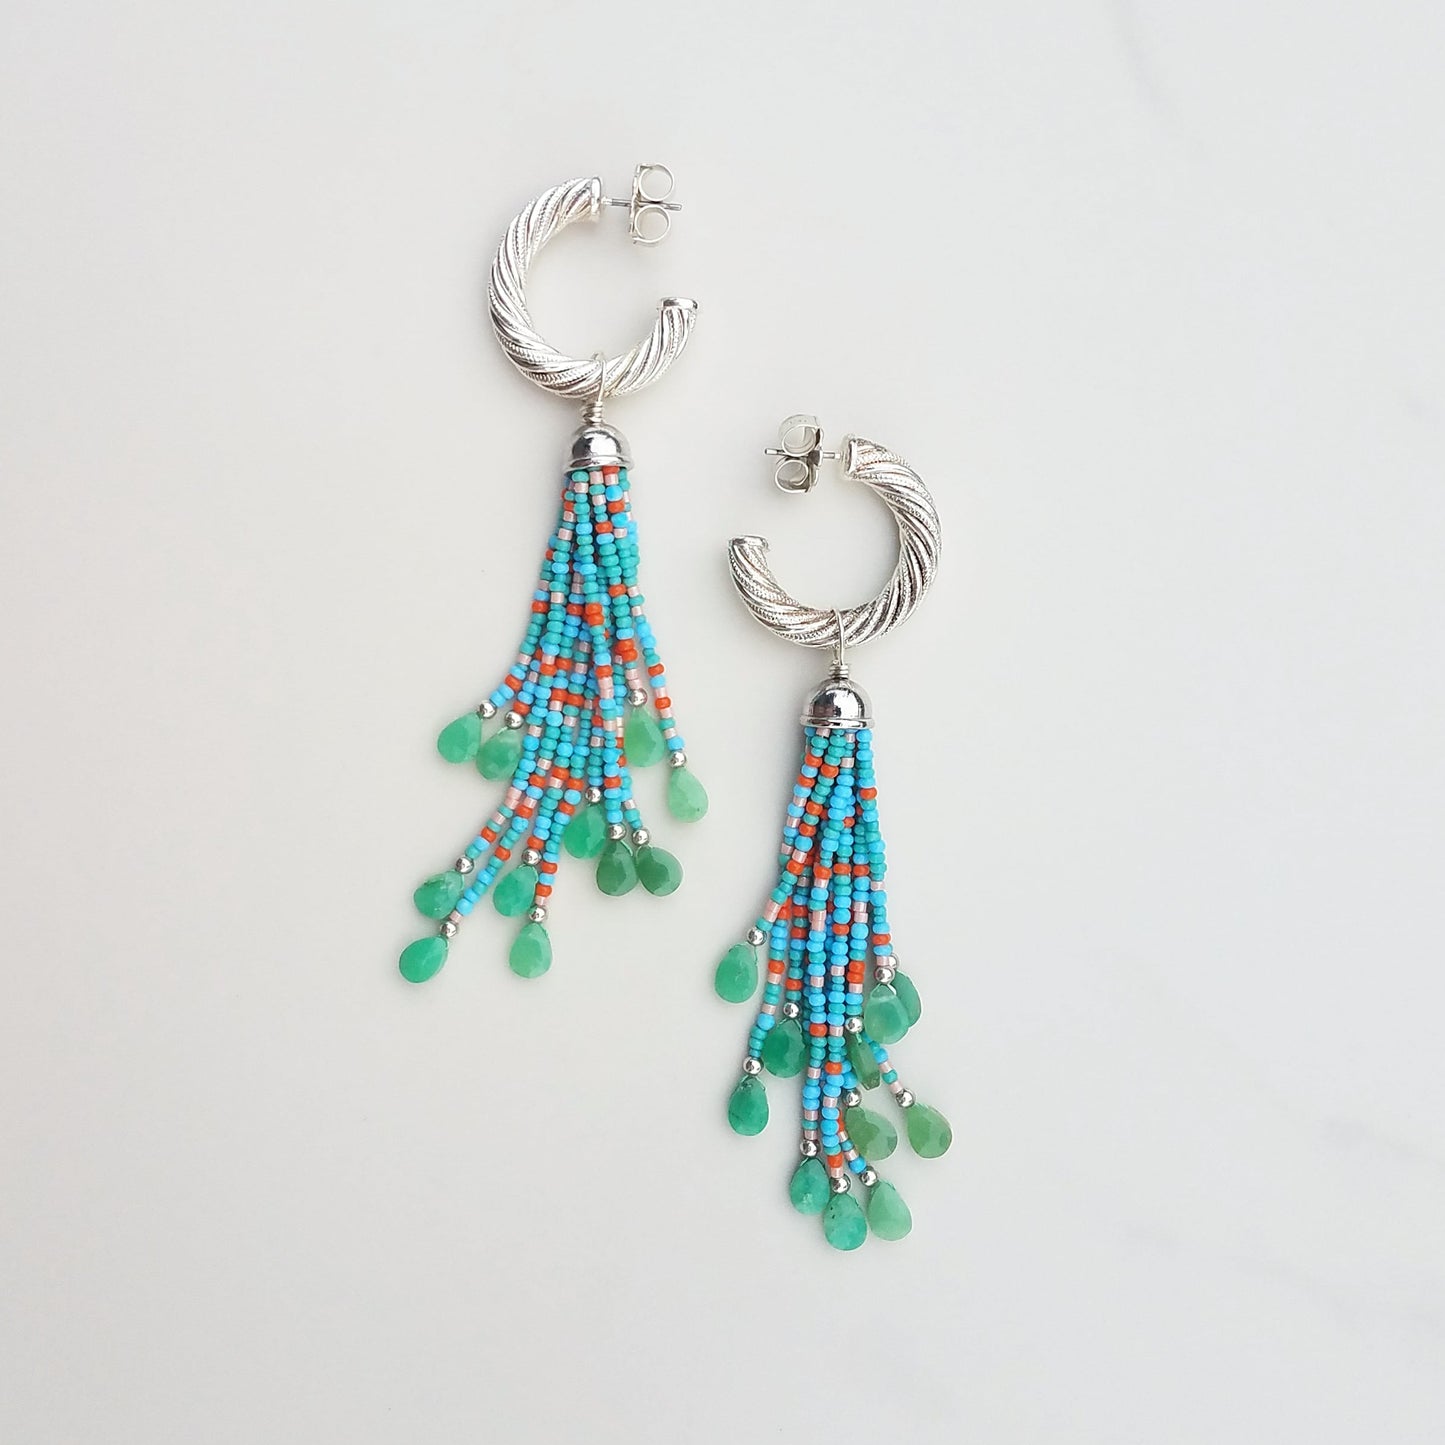 Silver Vintage Hoops with Turquoise & Chrysoprase Tassels